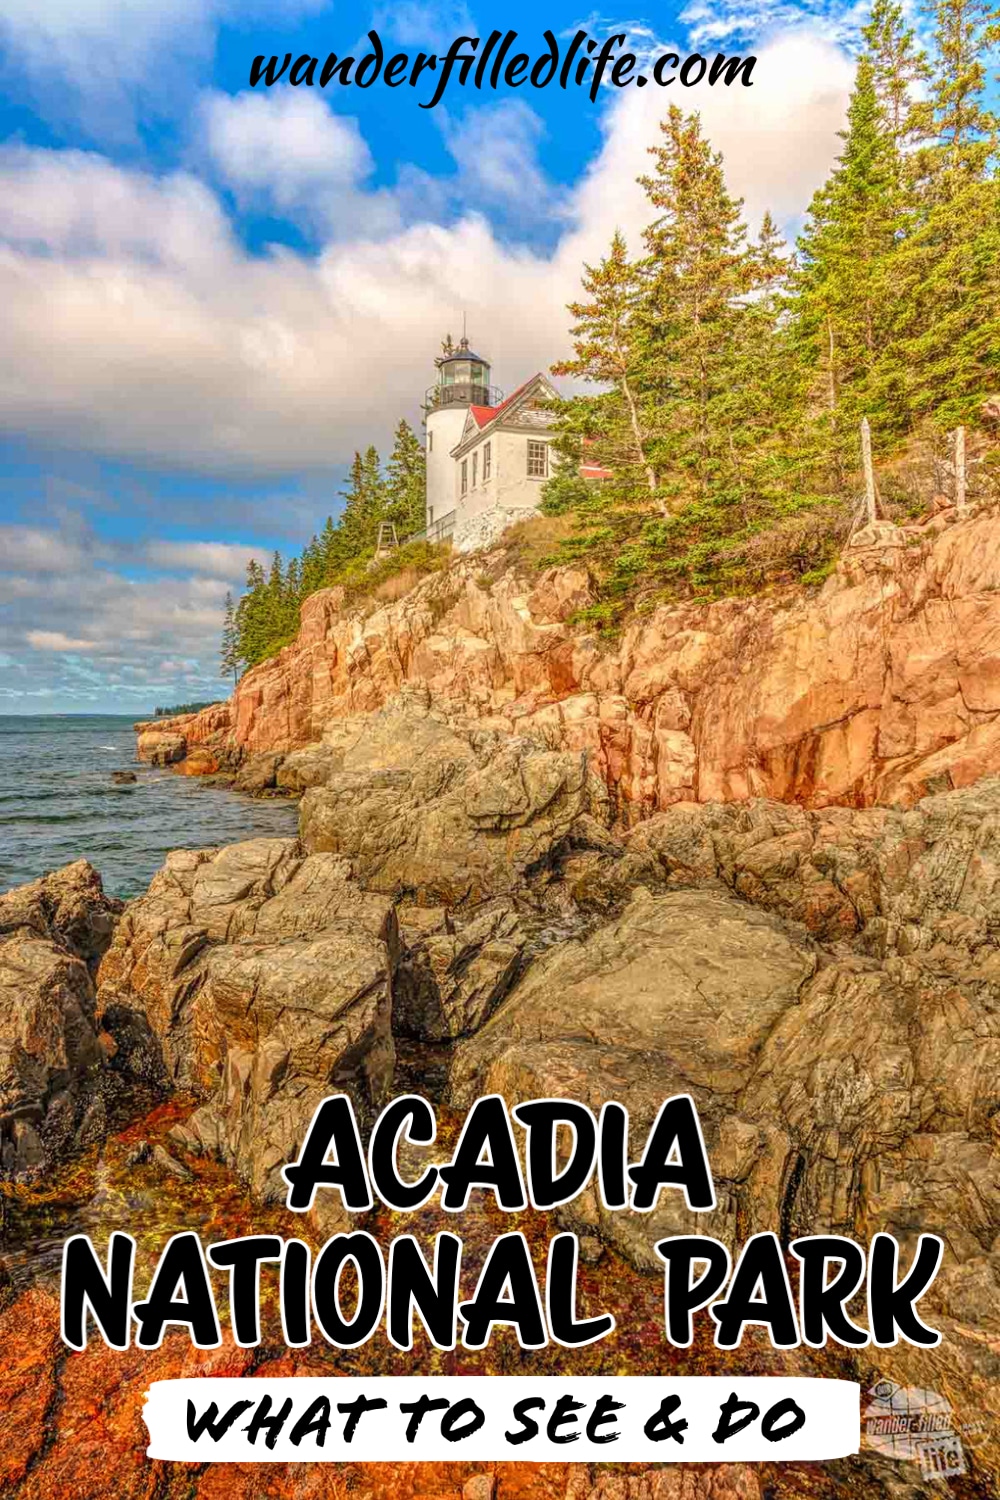 With two days in Acadia National Park, you can enjoy the rugged coast, mountain summits, and a walk on the historic carriage roads.